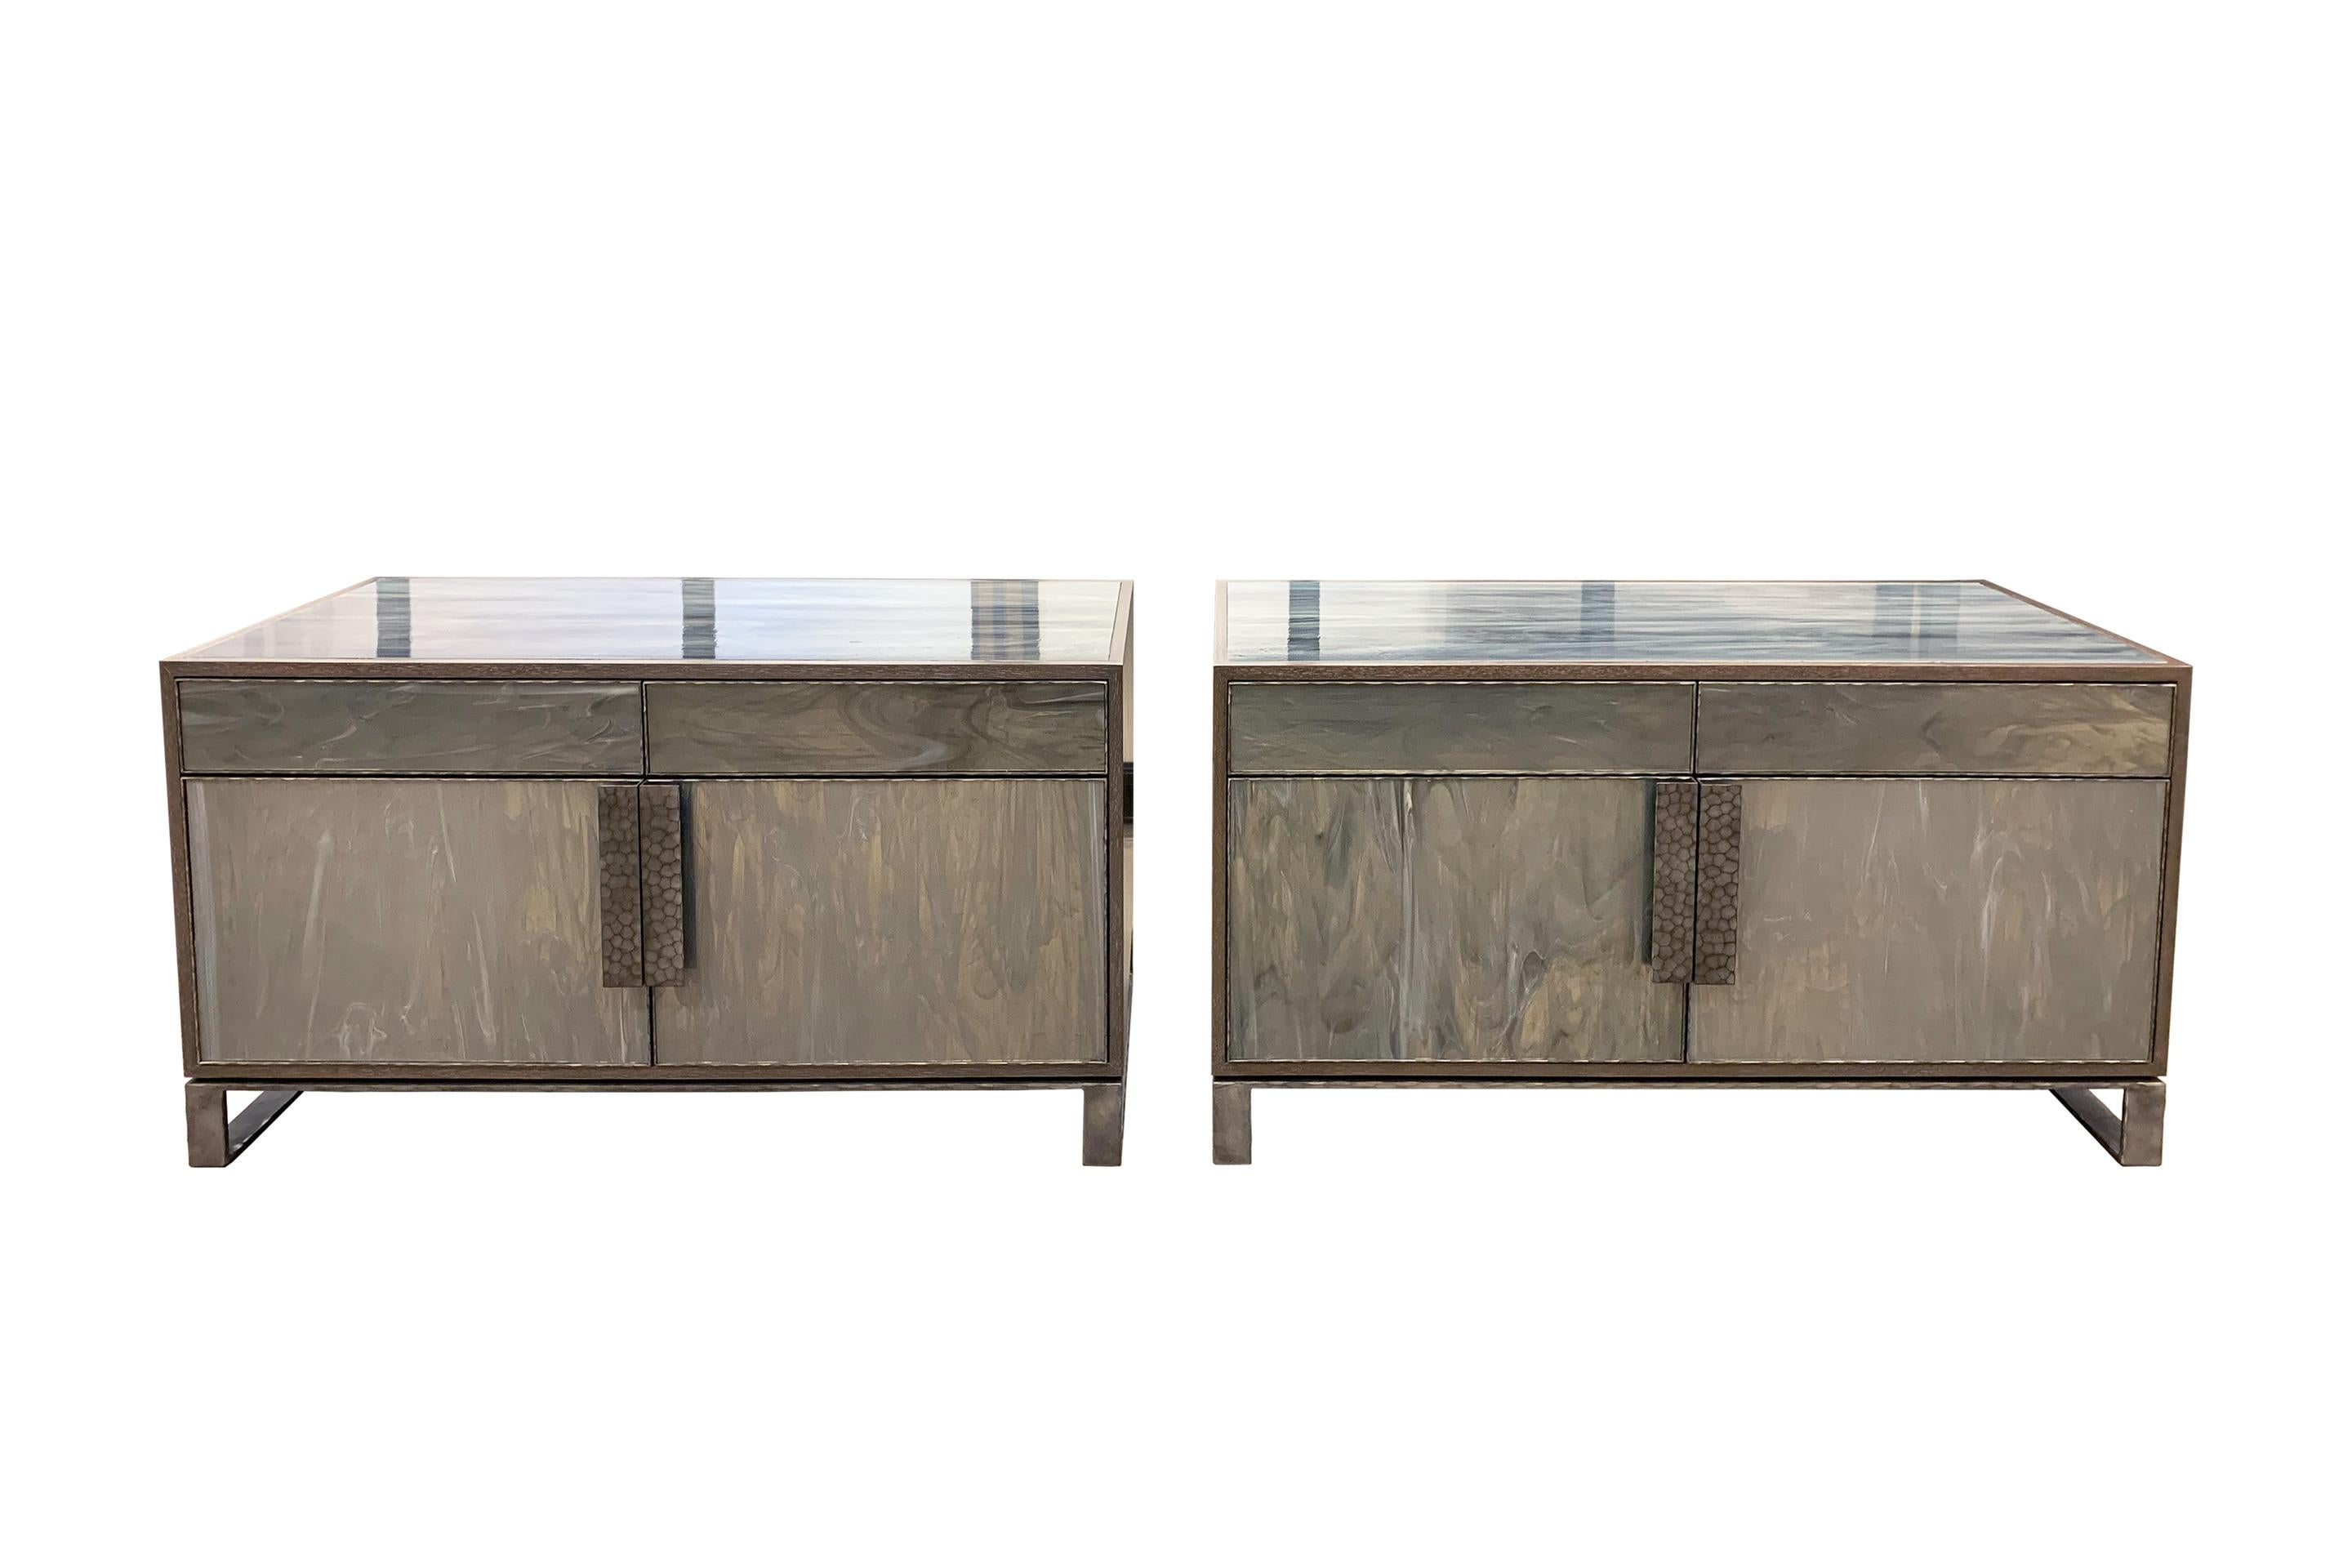 This chelsea buffet or sideboard by Ercole home has a 2-drawer and 2-door front, with Earl gray ceruse wood finish on oak.
Handcut glass panels in wispy gray silver are on the drawers, doors and top surface.
Hand-hammered metal framed doors,